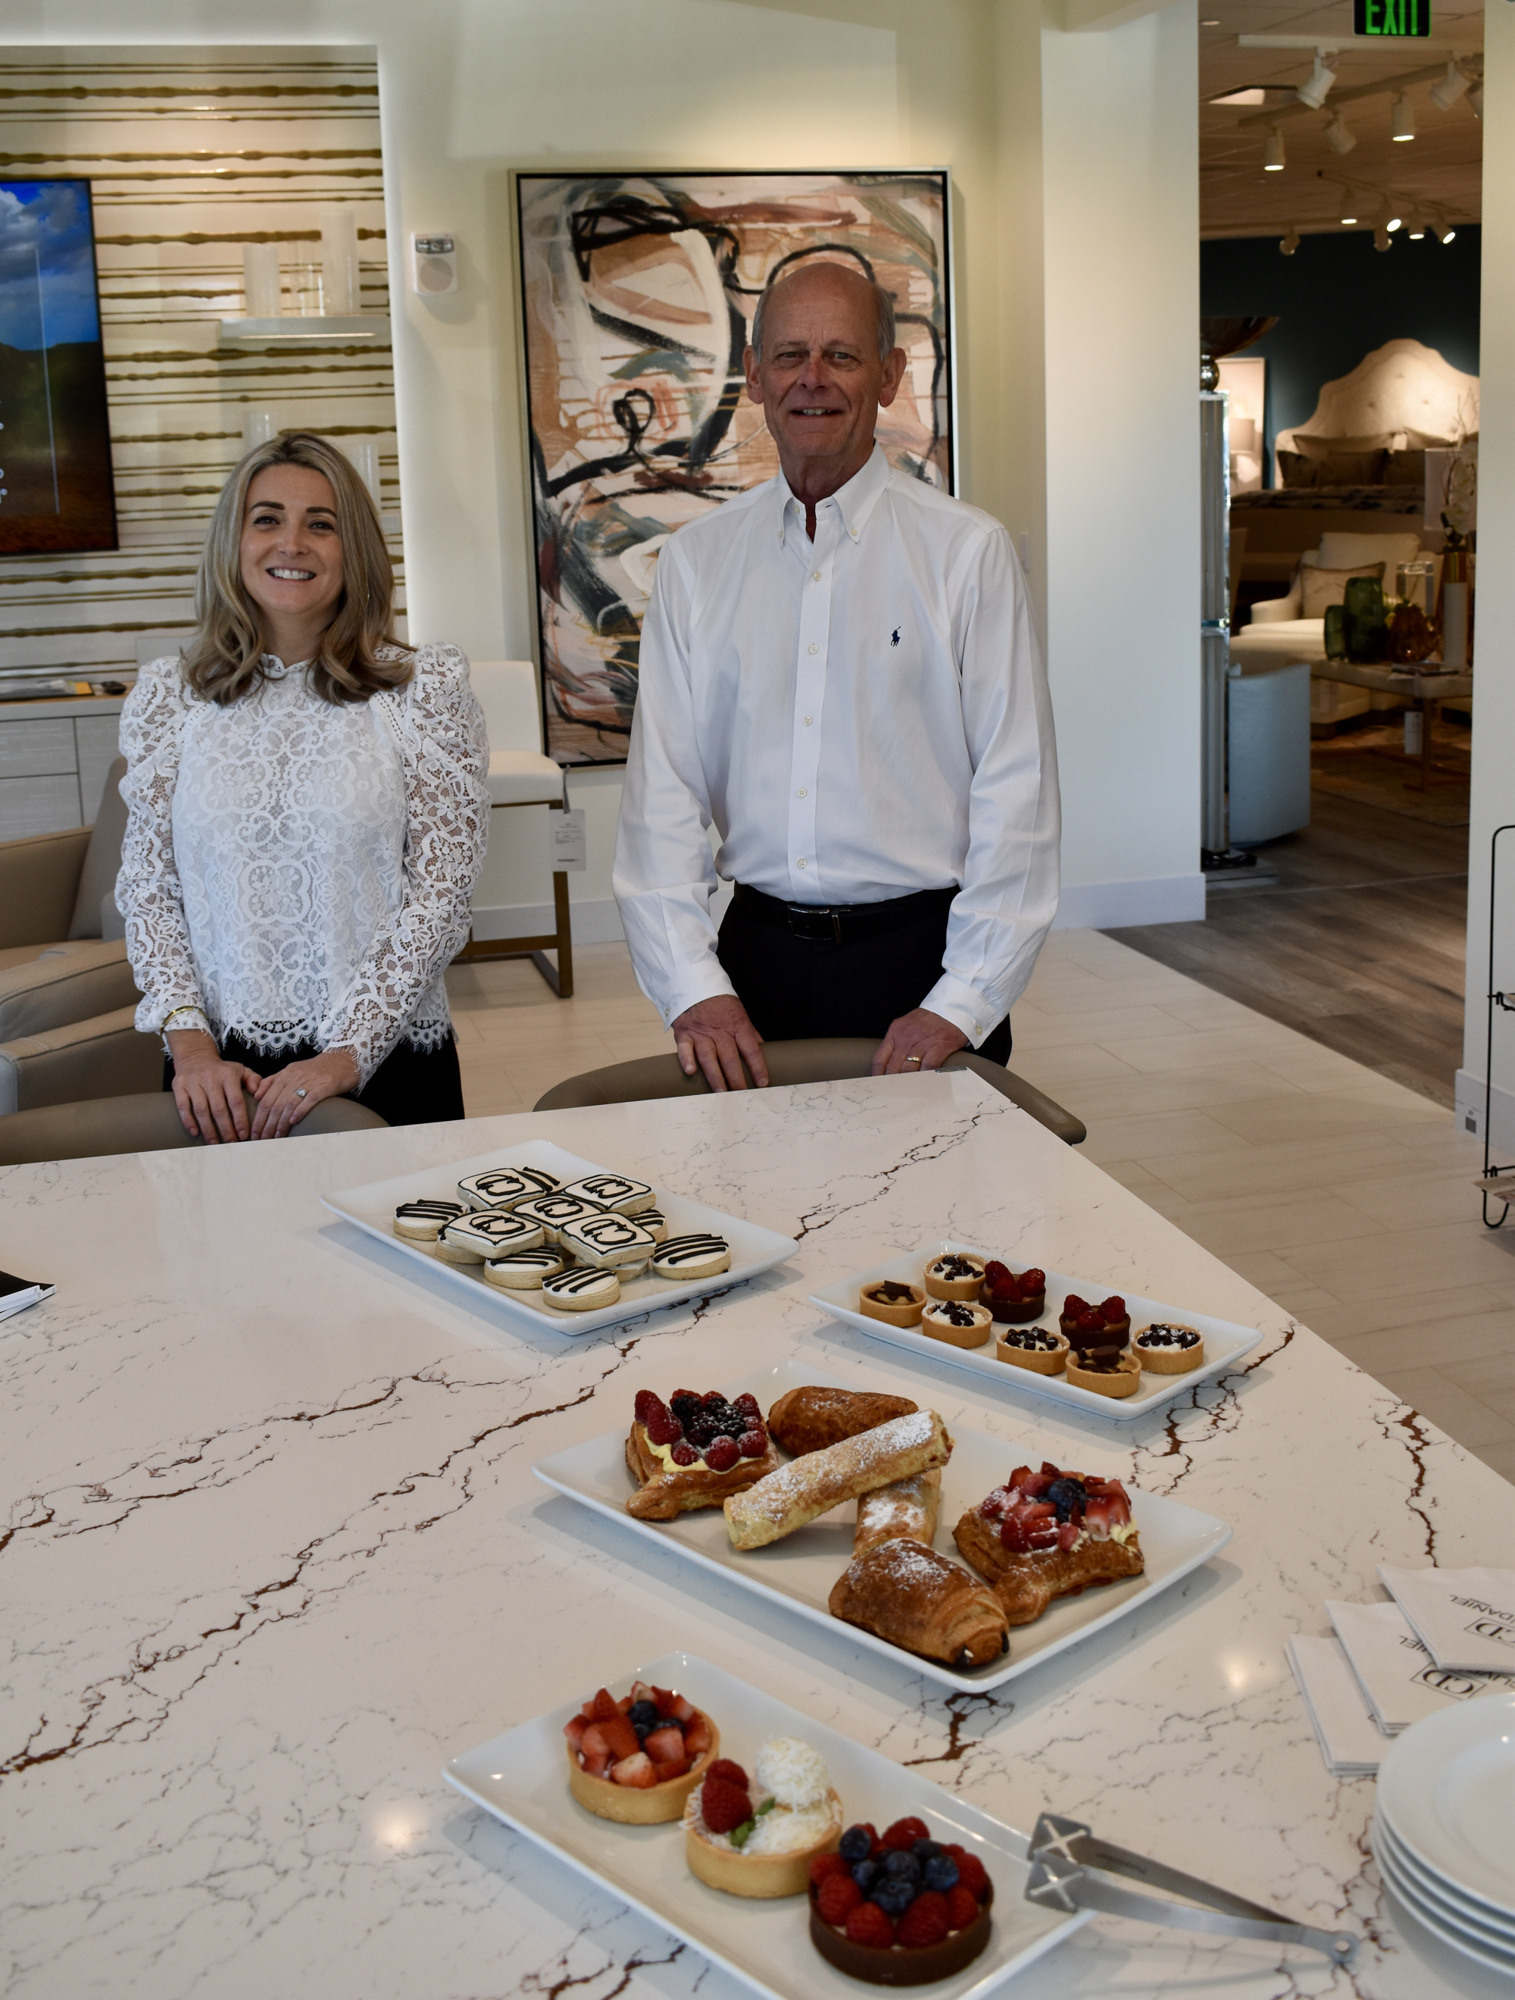 Sales Manager Shannon Gower and General Manager Rick Clary show off the store's cafe. (Photo by Eric Garwood)